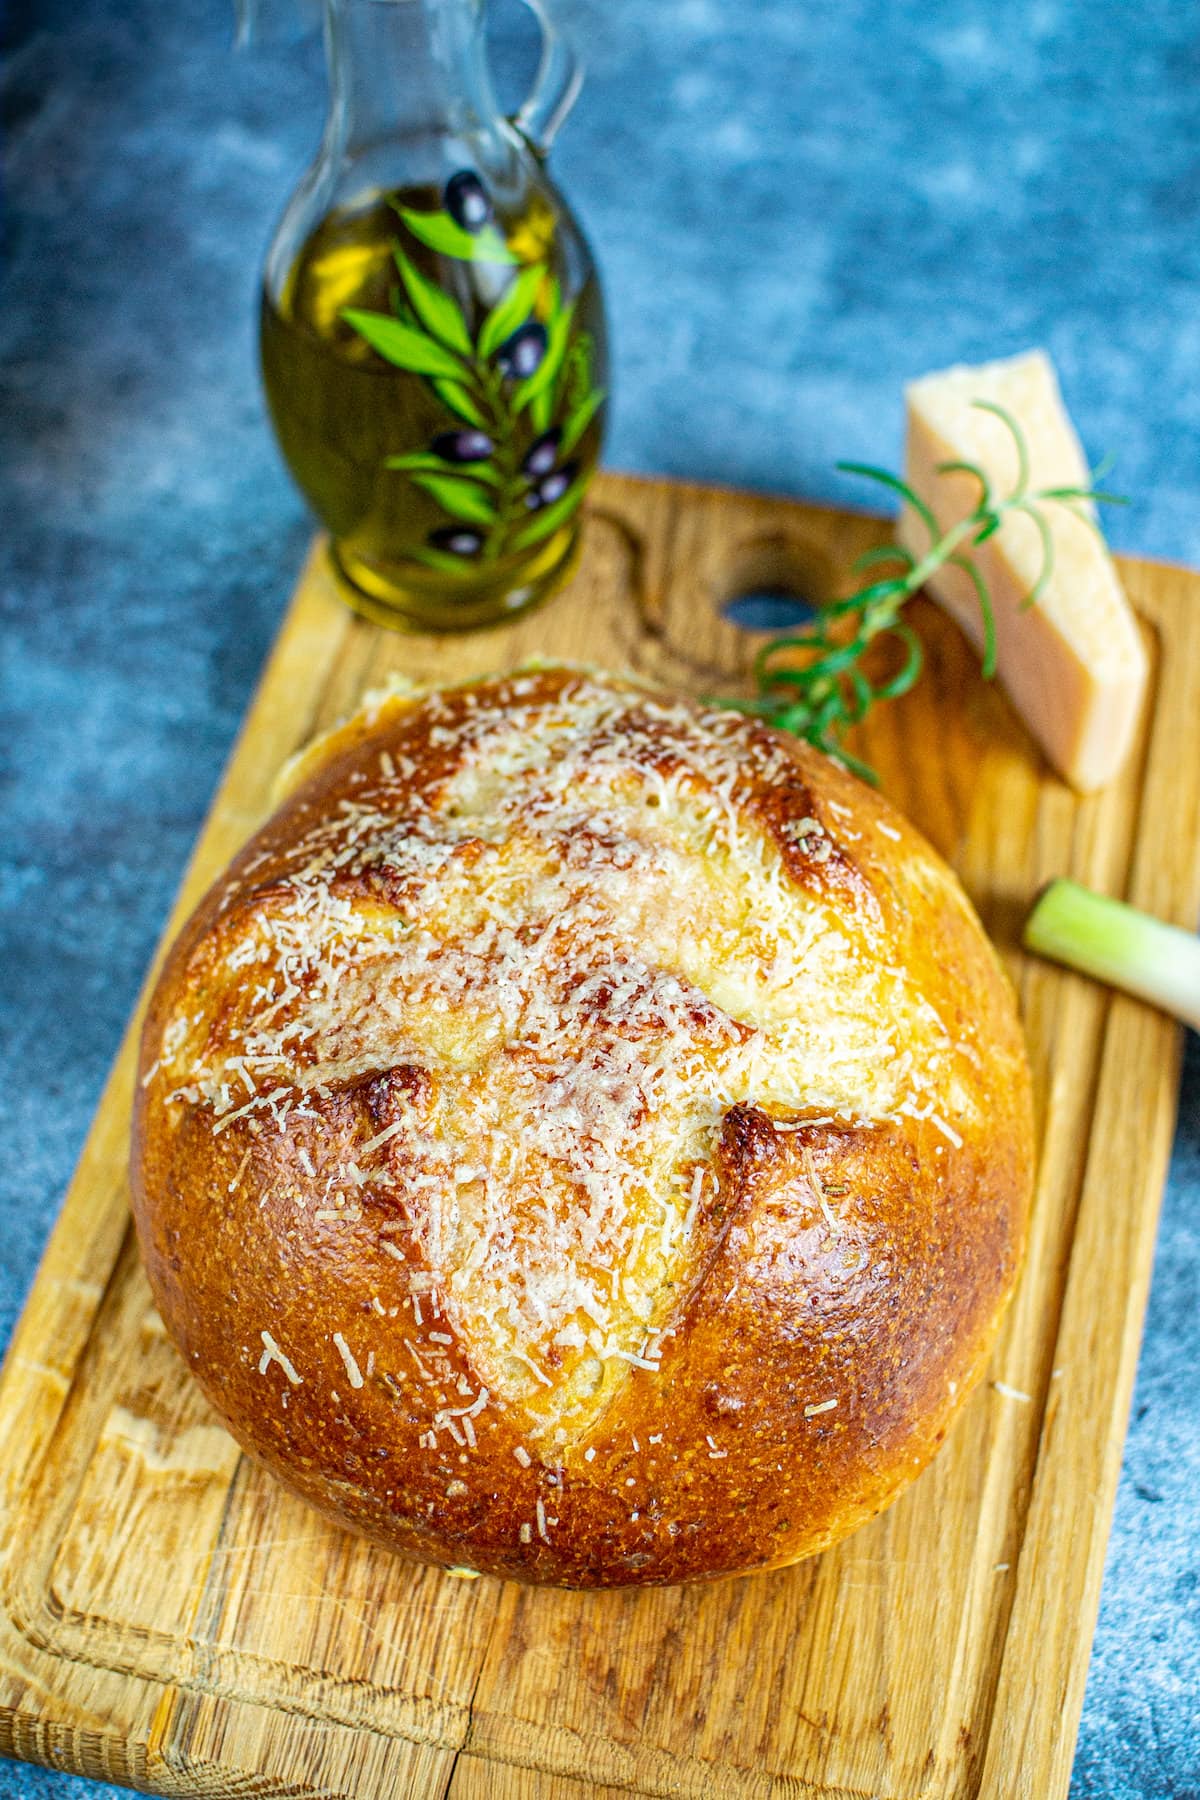 Rustic homemade Parmesan Bread on a wooden cutting board.